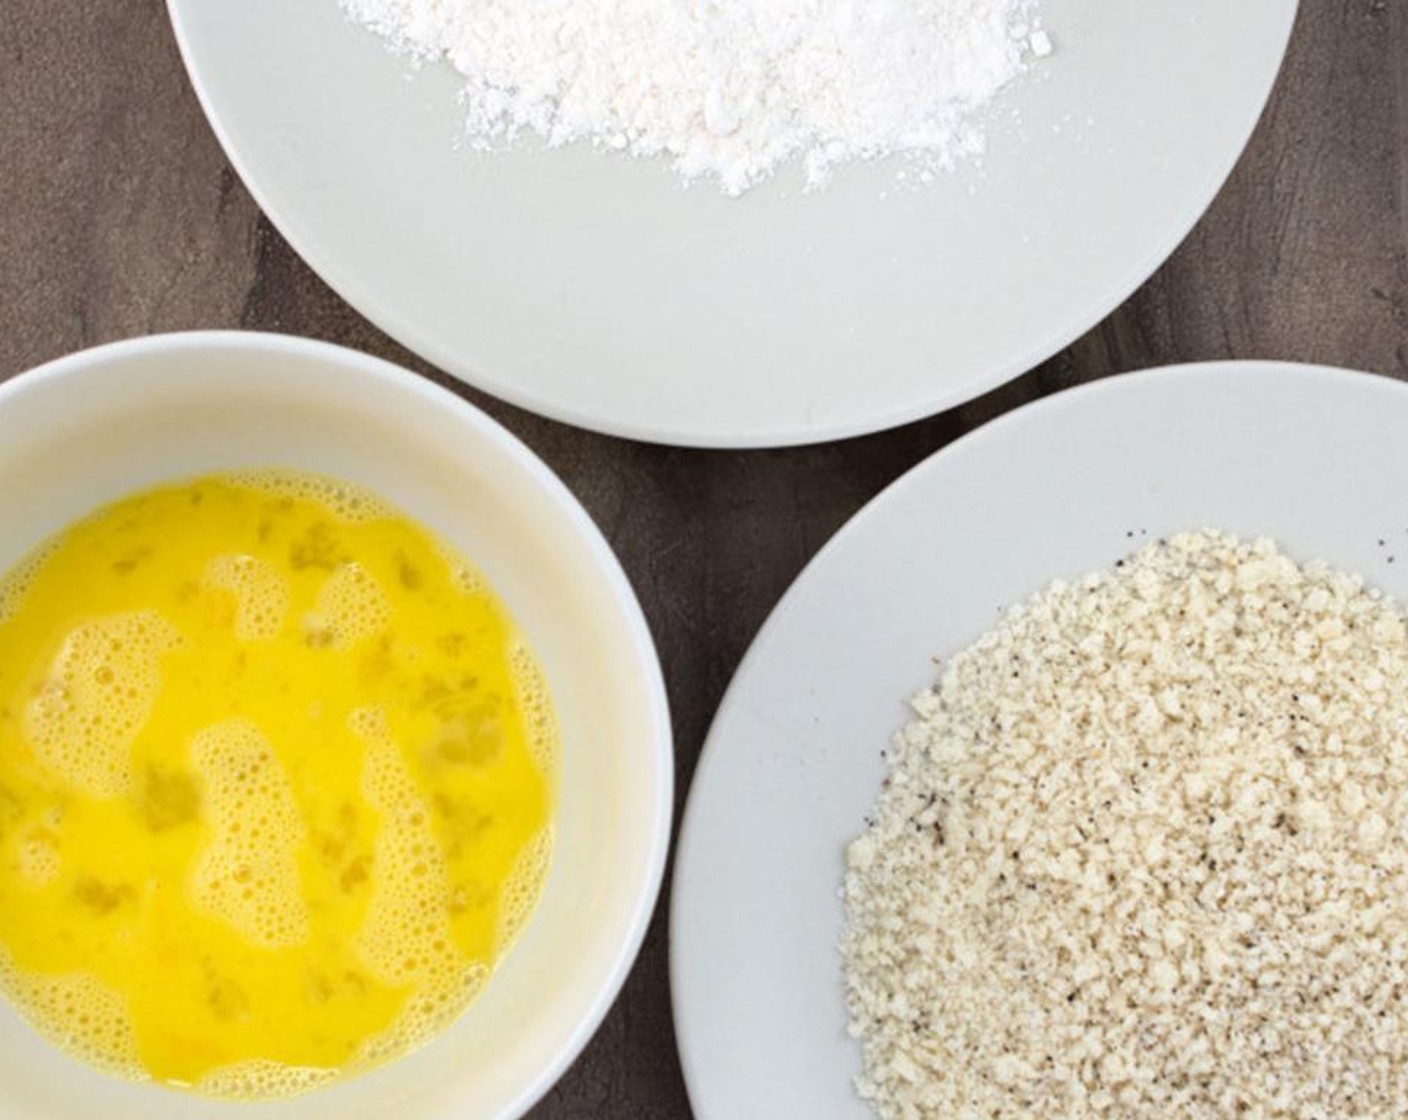 step 2 Begin by lining up a plate with All-Purpose Flour (1/4 cup), a bowl with the beaten Egg (1), and a plate with the Panko Breadcrumbs (3/4 cup).